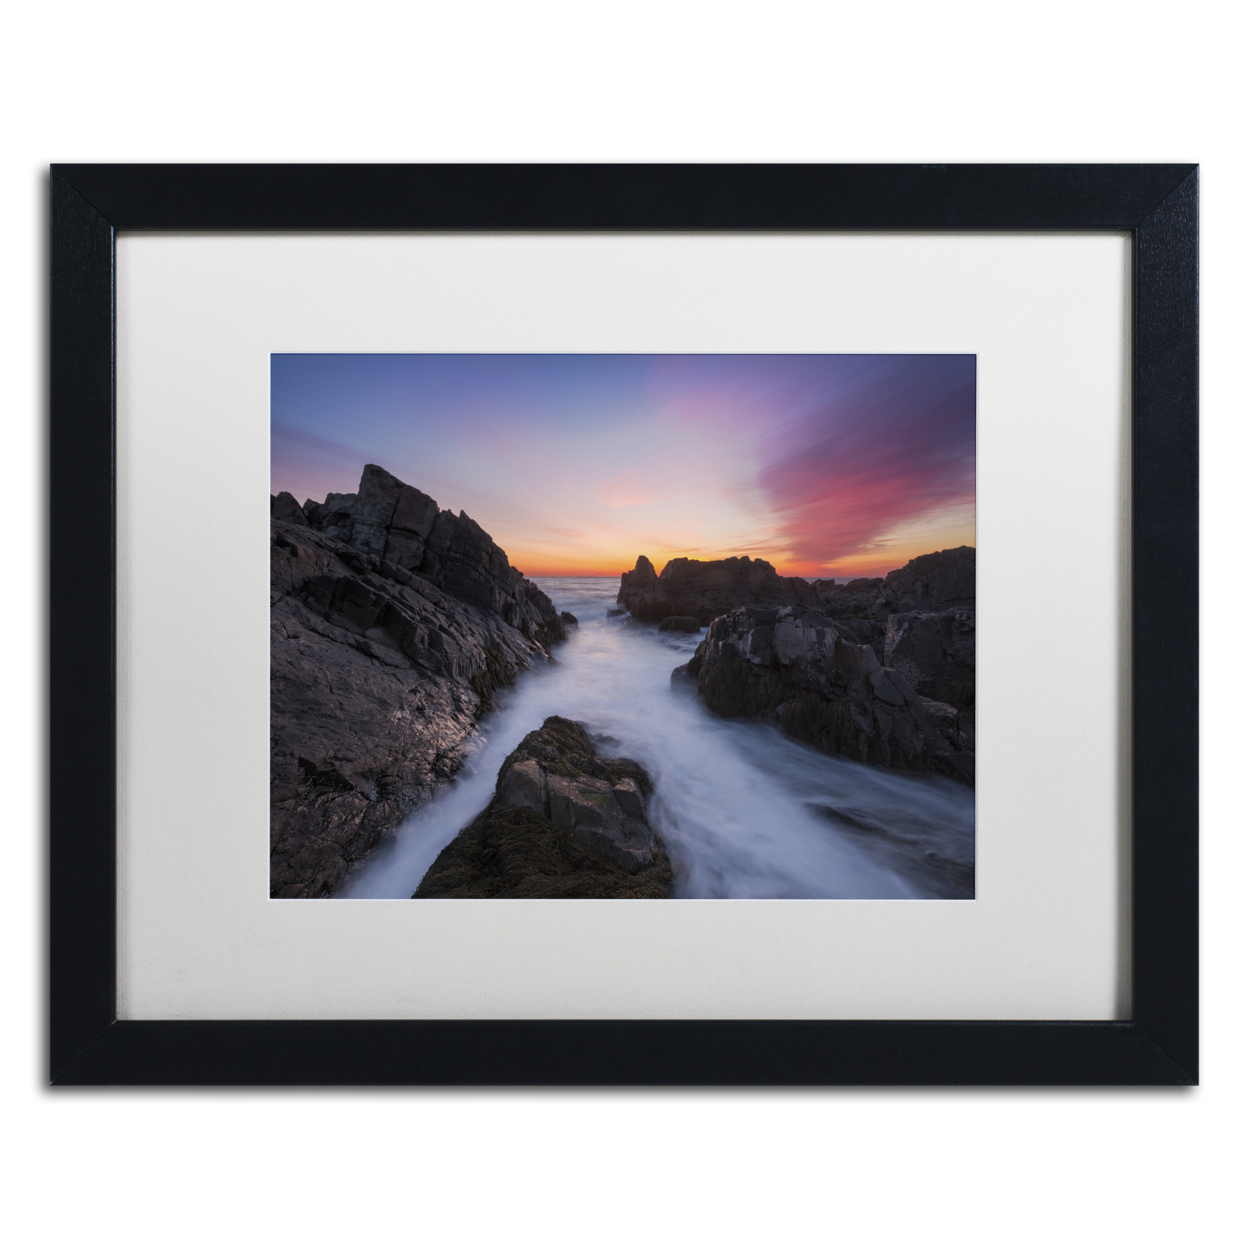 Michael Blanchette Photography 'Granite Arrows' Black Wooden Framed Art 18 X 22 Inches